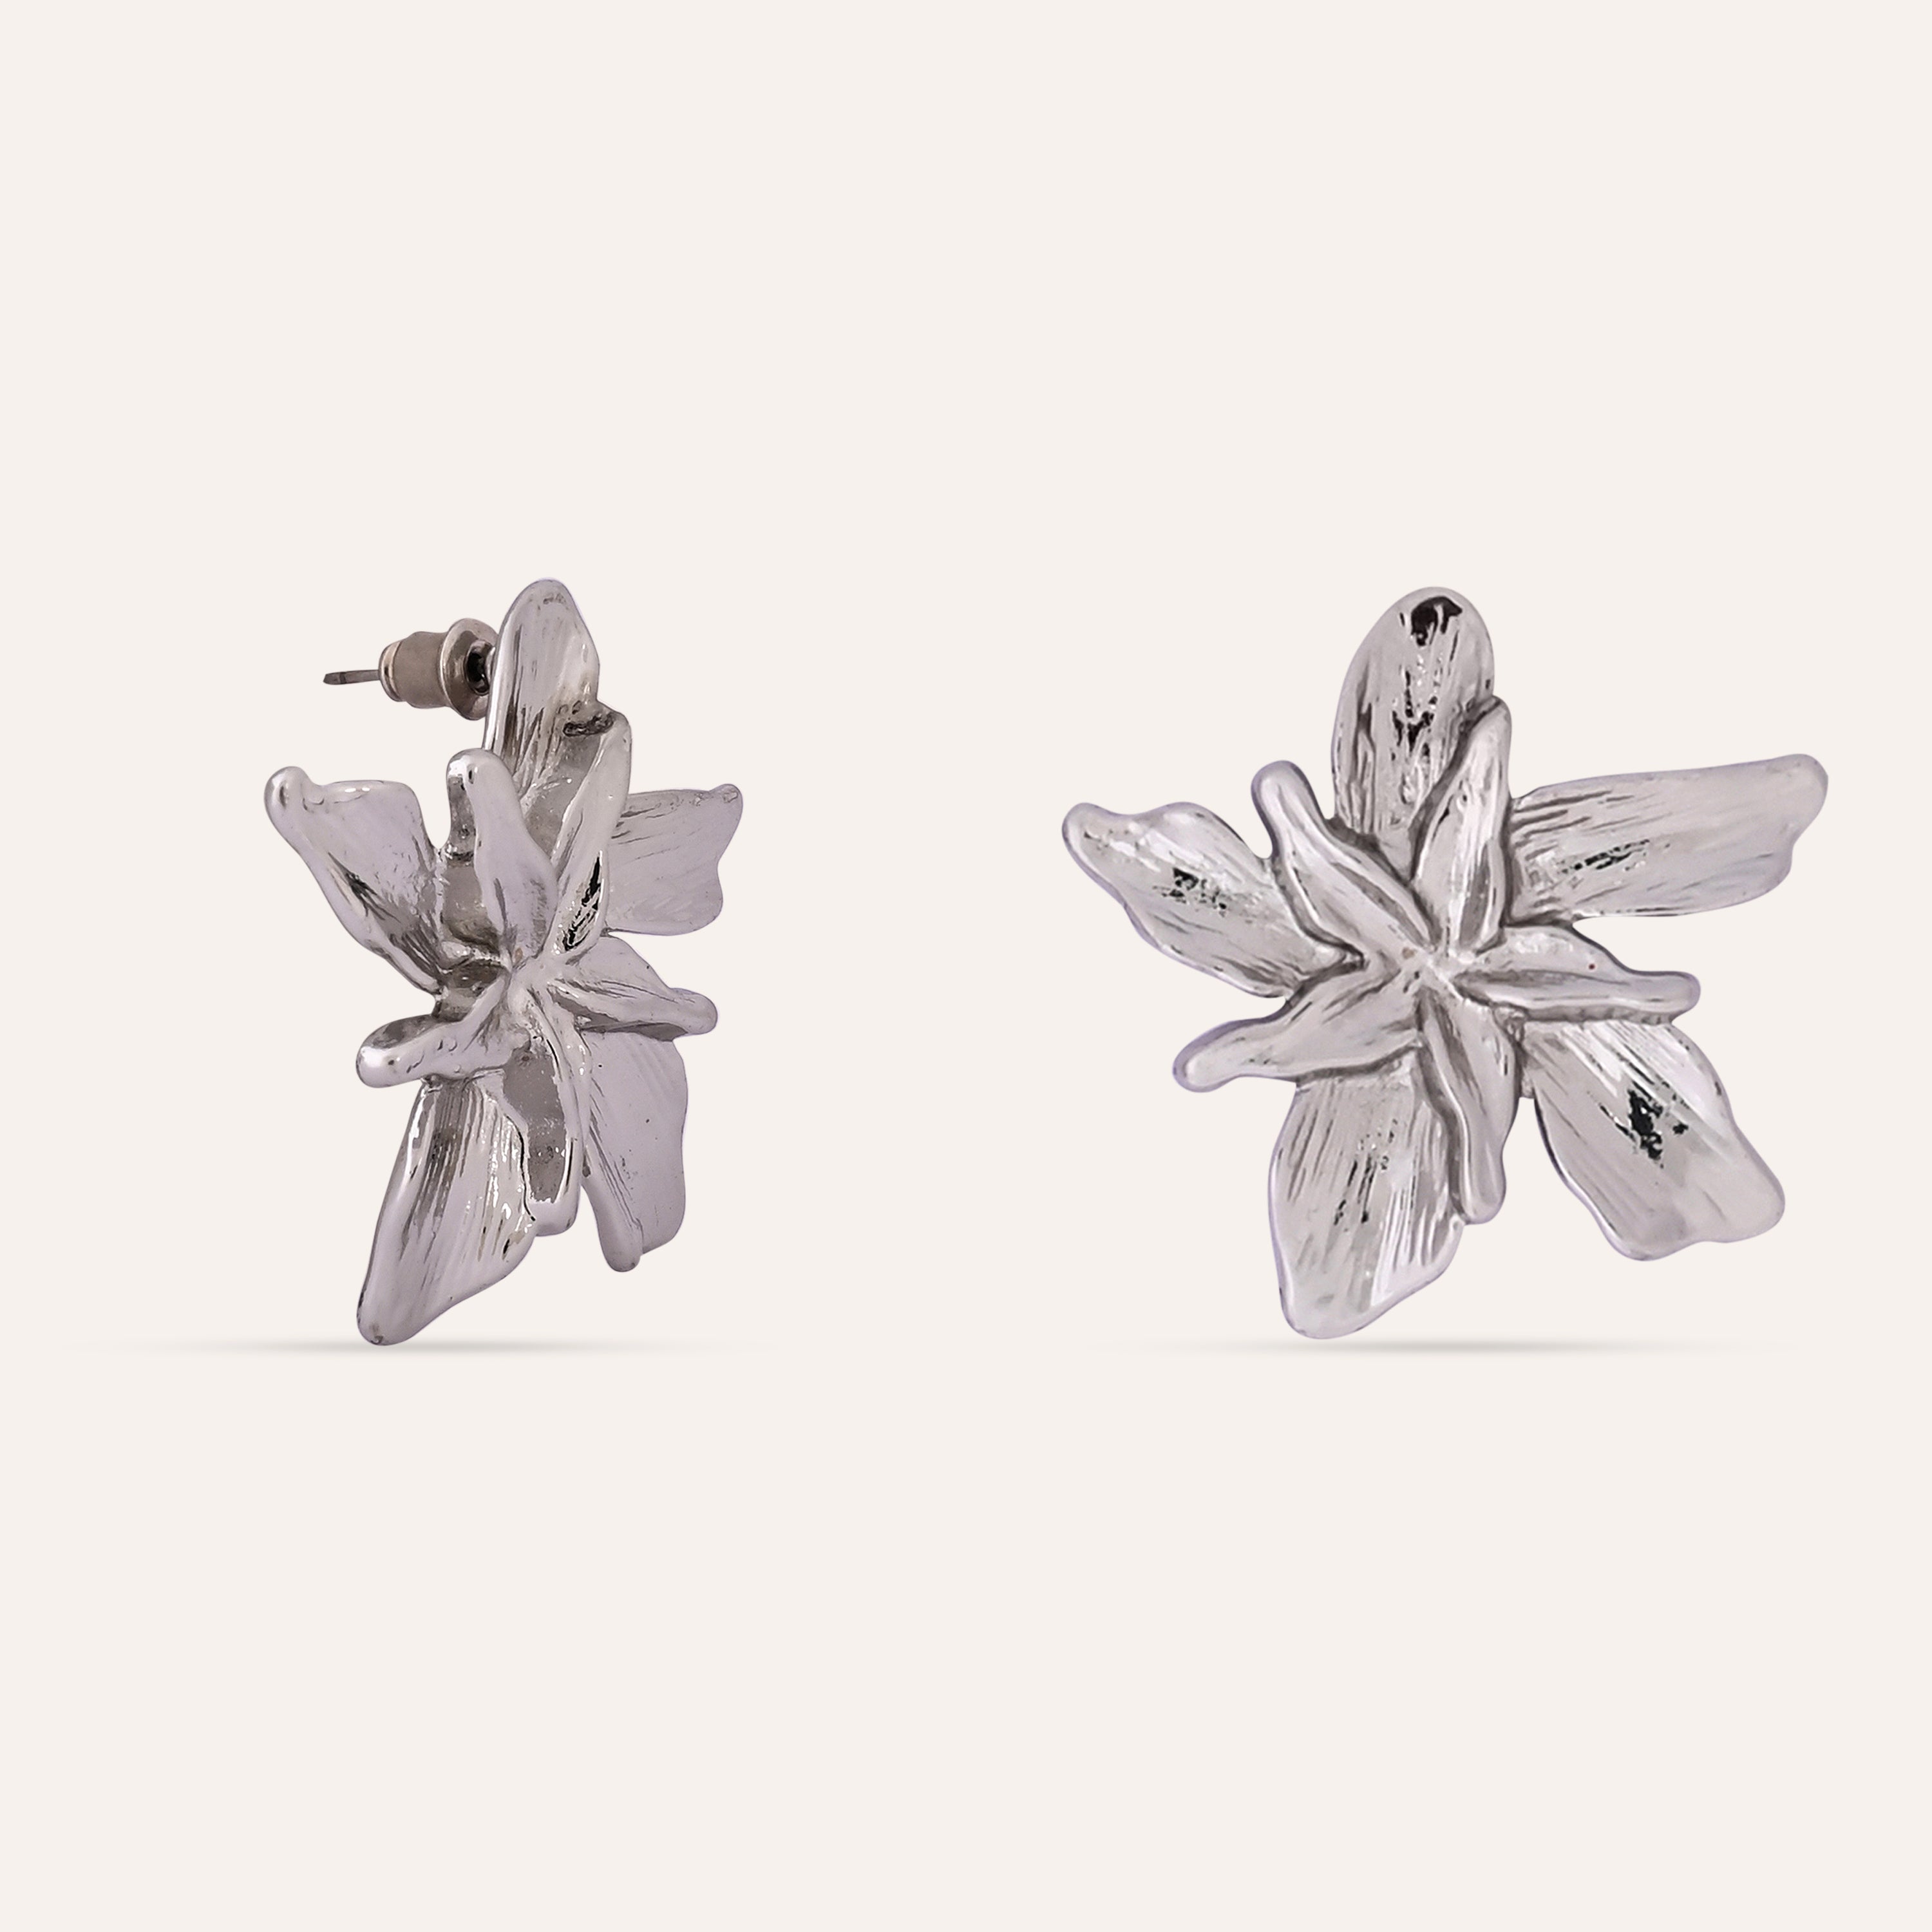 TFC Pretty Posy Silver Plated Stud Earrings-Discover daily wear gold earrings including stud earrings, hoop earrings, and pearl earrings, perfect as earrings for women and earrings for girls.Find the cheapest fashion jewellery which is anti-tarnis​h only at The Fun company